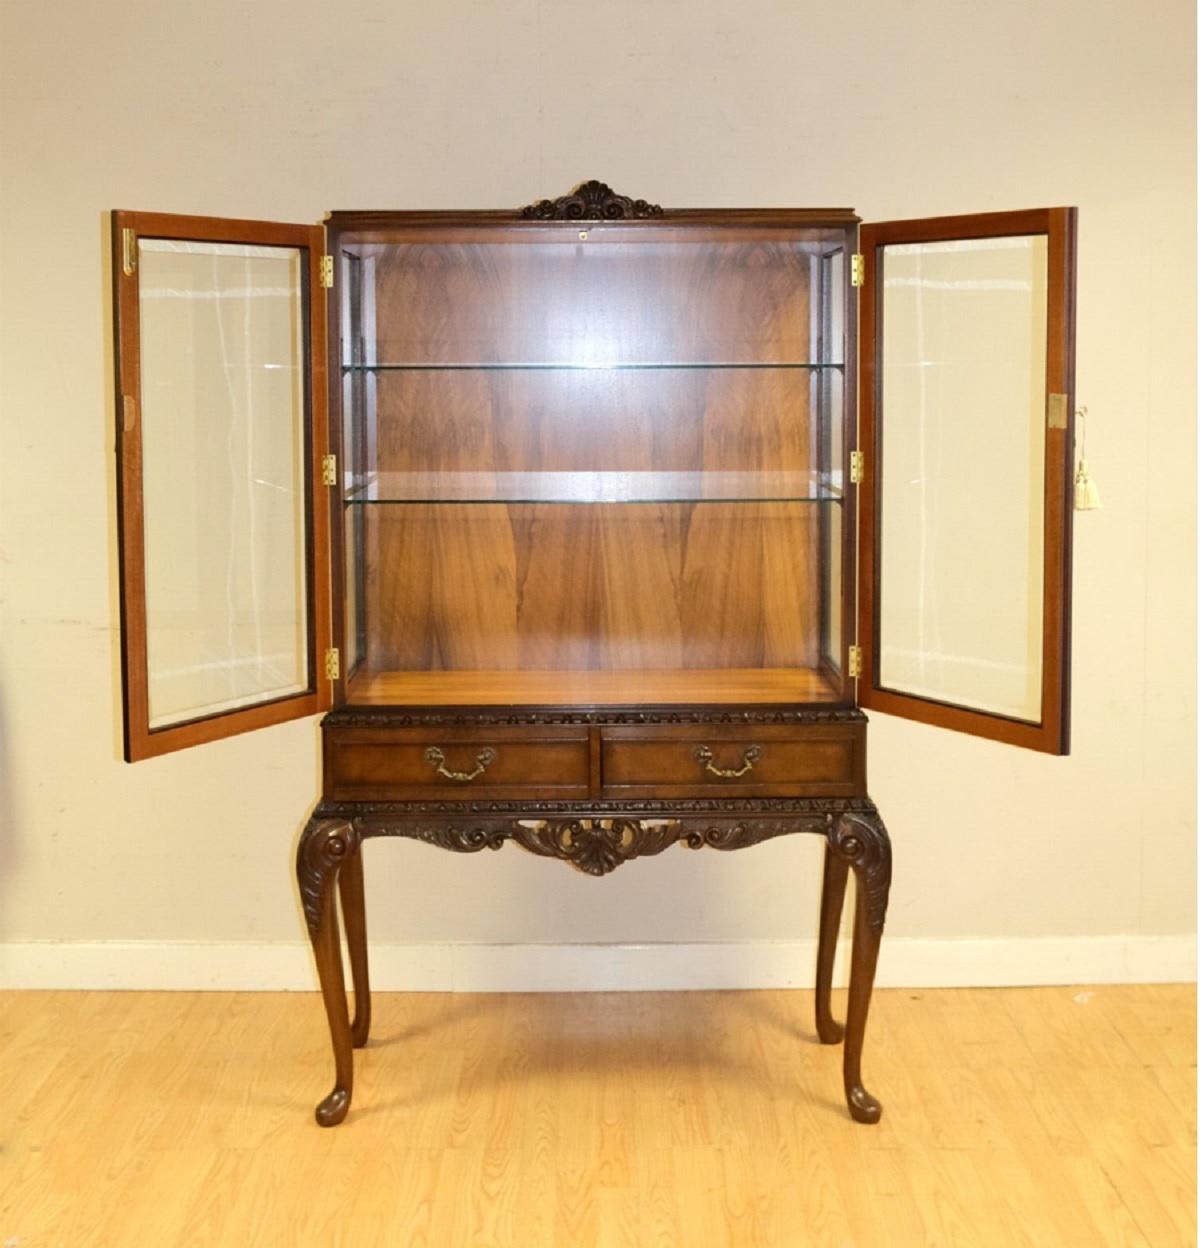 Queen Anne ViNTAGE DISPLAY CABINET ON QUEEN ANN STYLE LEGS WITH GLASS SHELVES & KEY For Sale